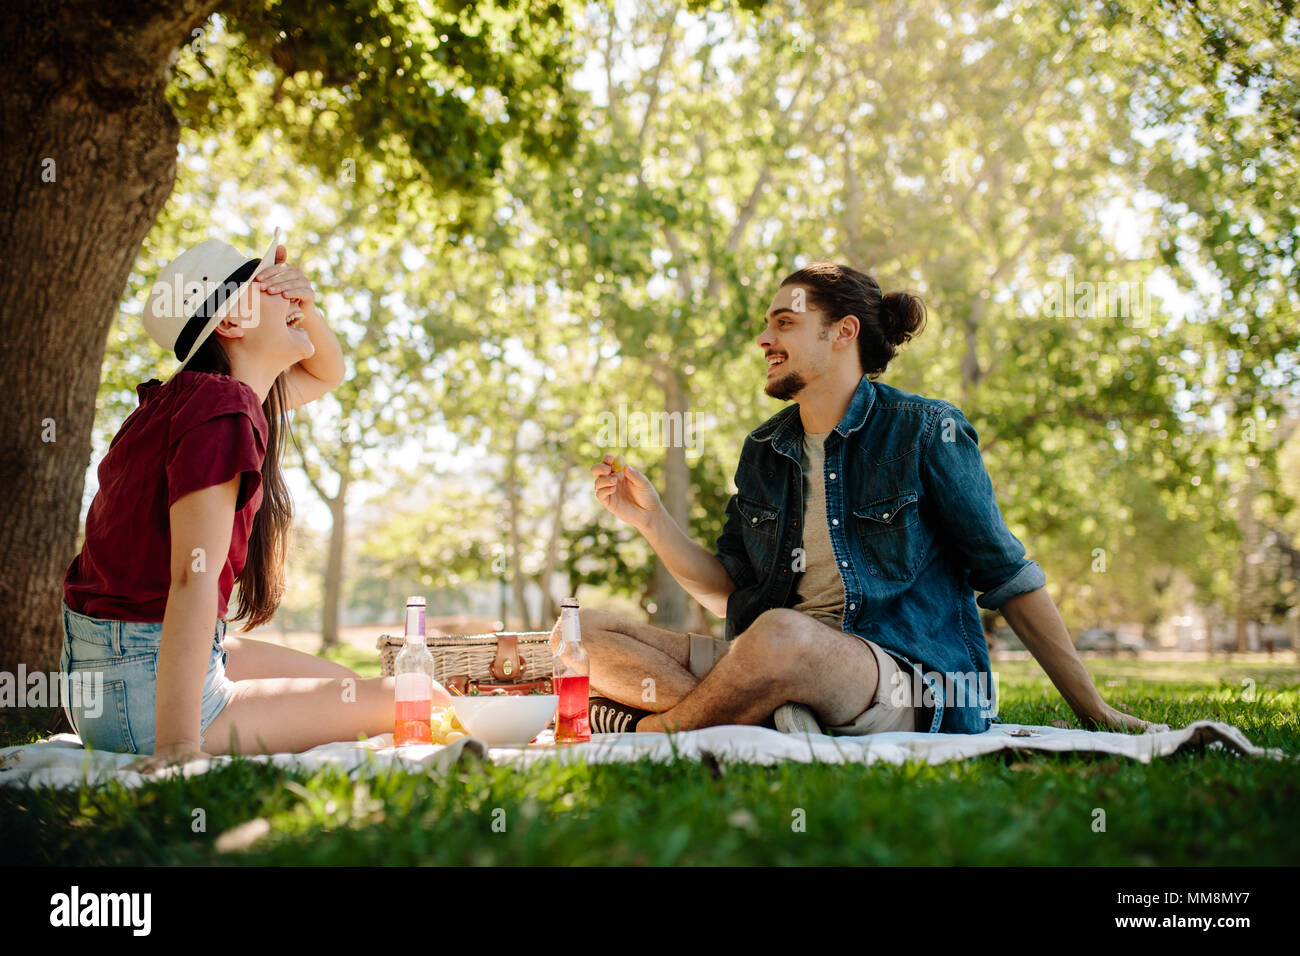 Couple playing a game on picnic at park. Woman covering her eyes with man holding a fruit in hand. Stock Photo